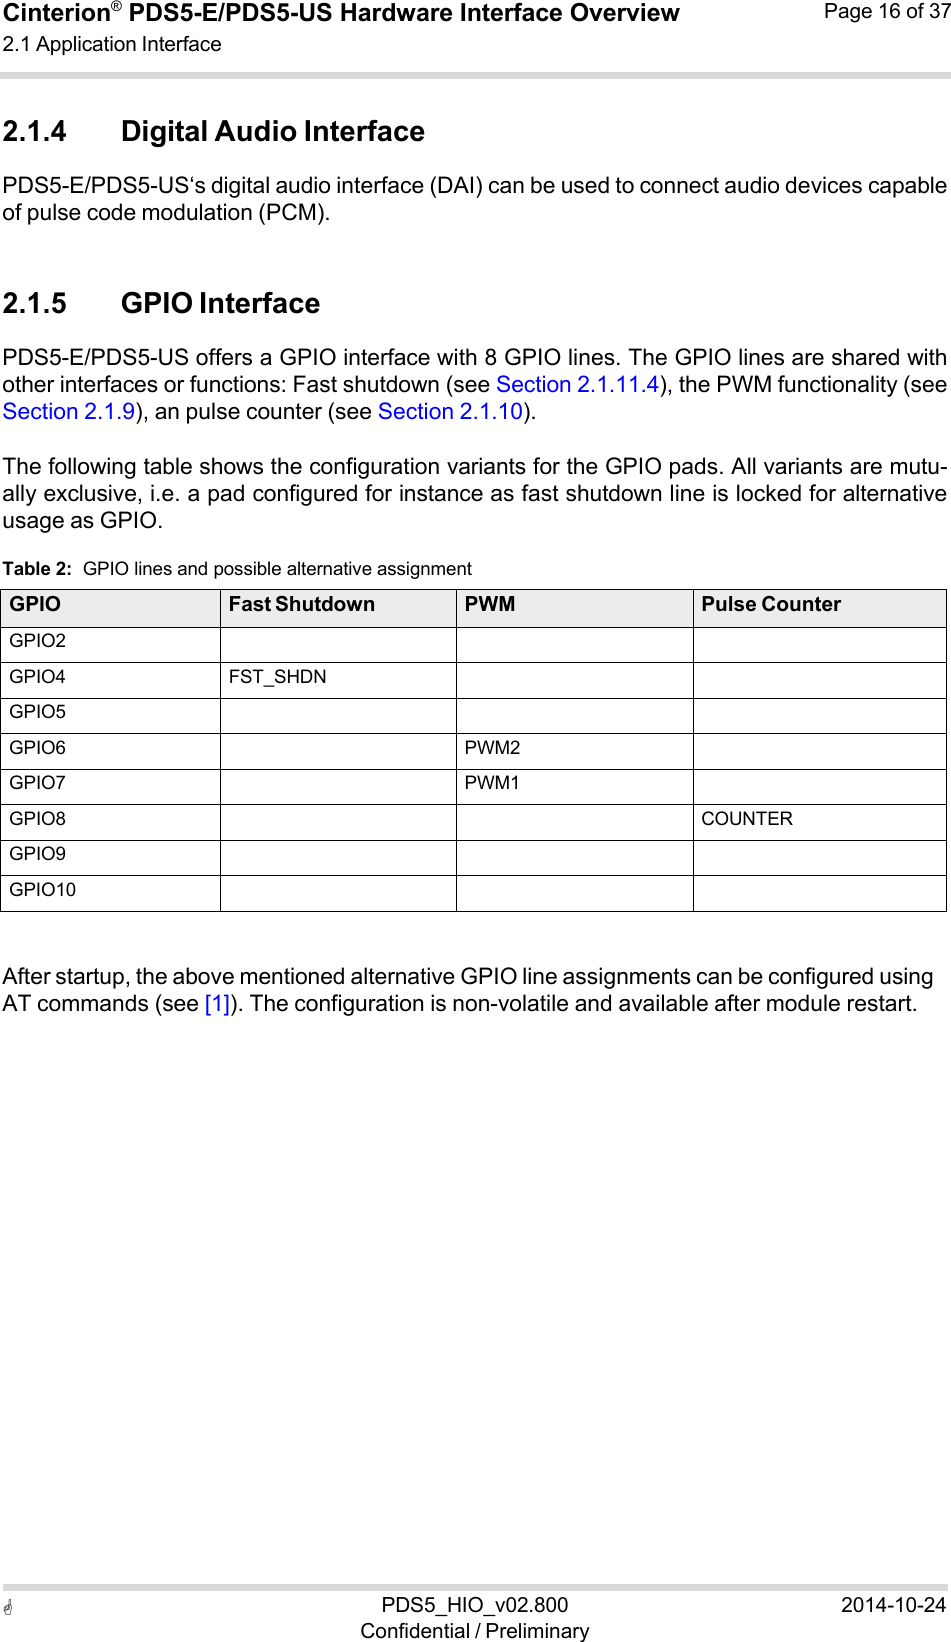  PDS5_HIO_v02.800Confidential / Preliminary2014-10-24Cinterion®  PDS5-E/PDS5-US Hardware Interface Overview2.1 Application Interface Page 16 of 37   2.1.4 Digital Audio Interface PDS5-E/PDS5-US‘s digital audio interface (DAI) can be used to connect audio devices capable of pulse code modulation (PCM).   2.1.5 GPIO Interface PDS5-E/PDS5-US offers a GPIO interface with 8 GPIO lines. The GPIO lines are shared with other interfaces or functions: Fast shutdown (see Section 2.1.11.4), the PWM functionality (see Section 2.1.9), an pulse counter (see Section 2.1.10).  The following table shows the configuration variants for the GPIO pads. All variants are mutu- ally exclusive, i.e. a pad configured for instance as fast shutdown line is locked for alternative usage as GPIO.  Table 2:  GPIO lines and possible alternative assignment  GPIO Fast Shutdown PWM Pulse Counter GPIO2    GPIO4 FST_SHDN   GPIO5    GPIO6  PWM2  GPIO7  PWM1  GPIO8    COUNTER GPIO9    GPIO10      After startup, the above mentioned alternative GPIO line assignments can be configured using AT commands (see [1]). The configuration is non-volatile and available after module restart. 